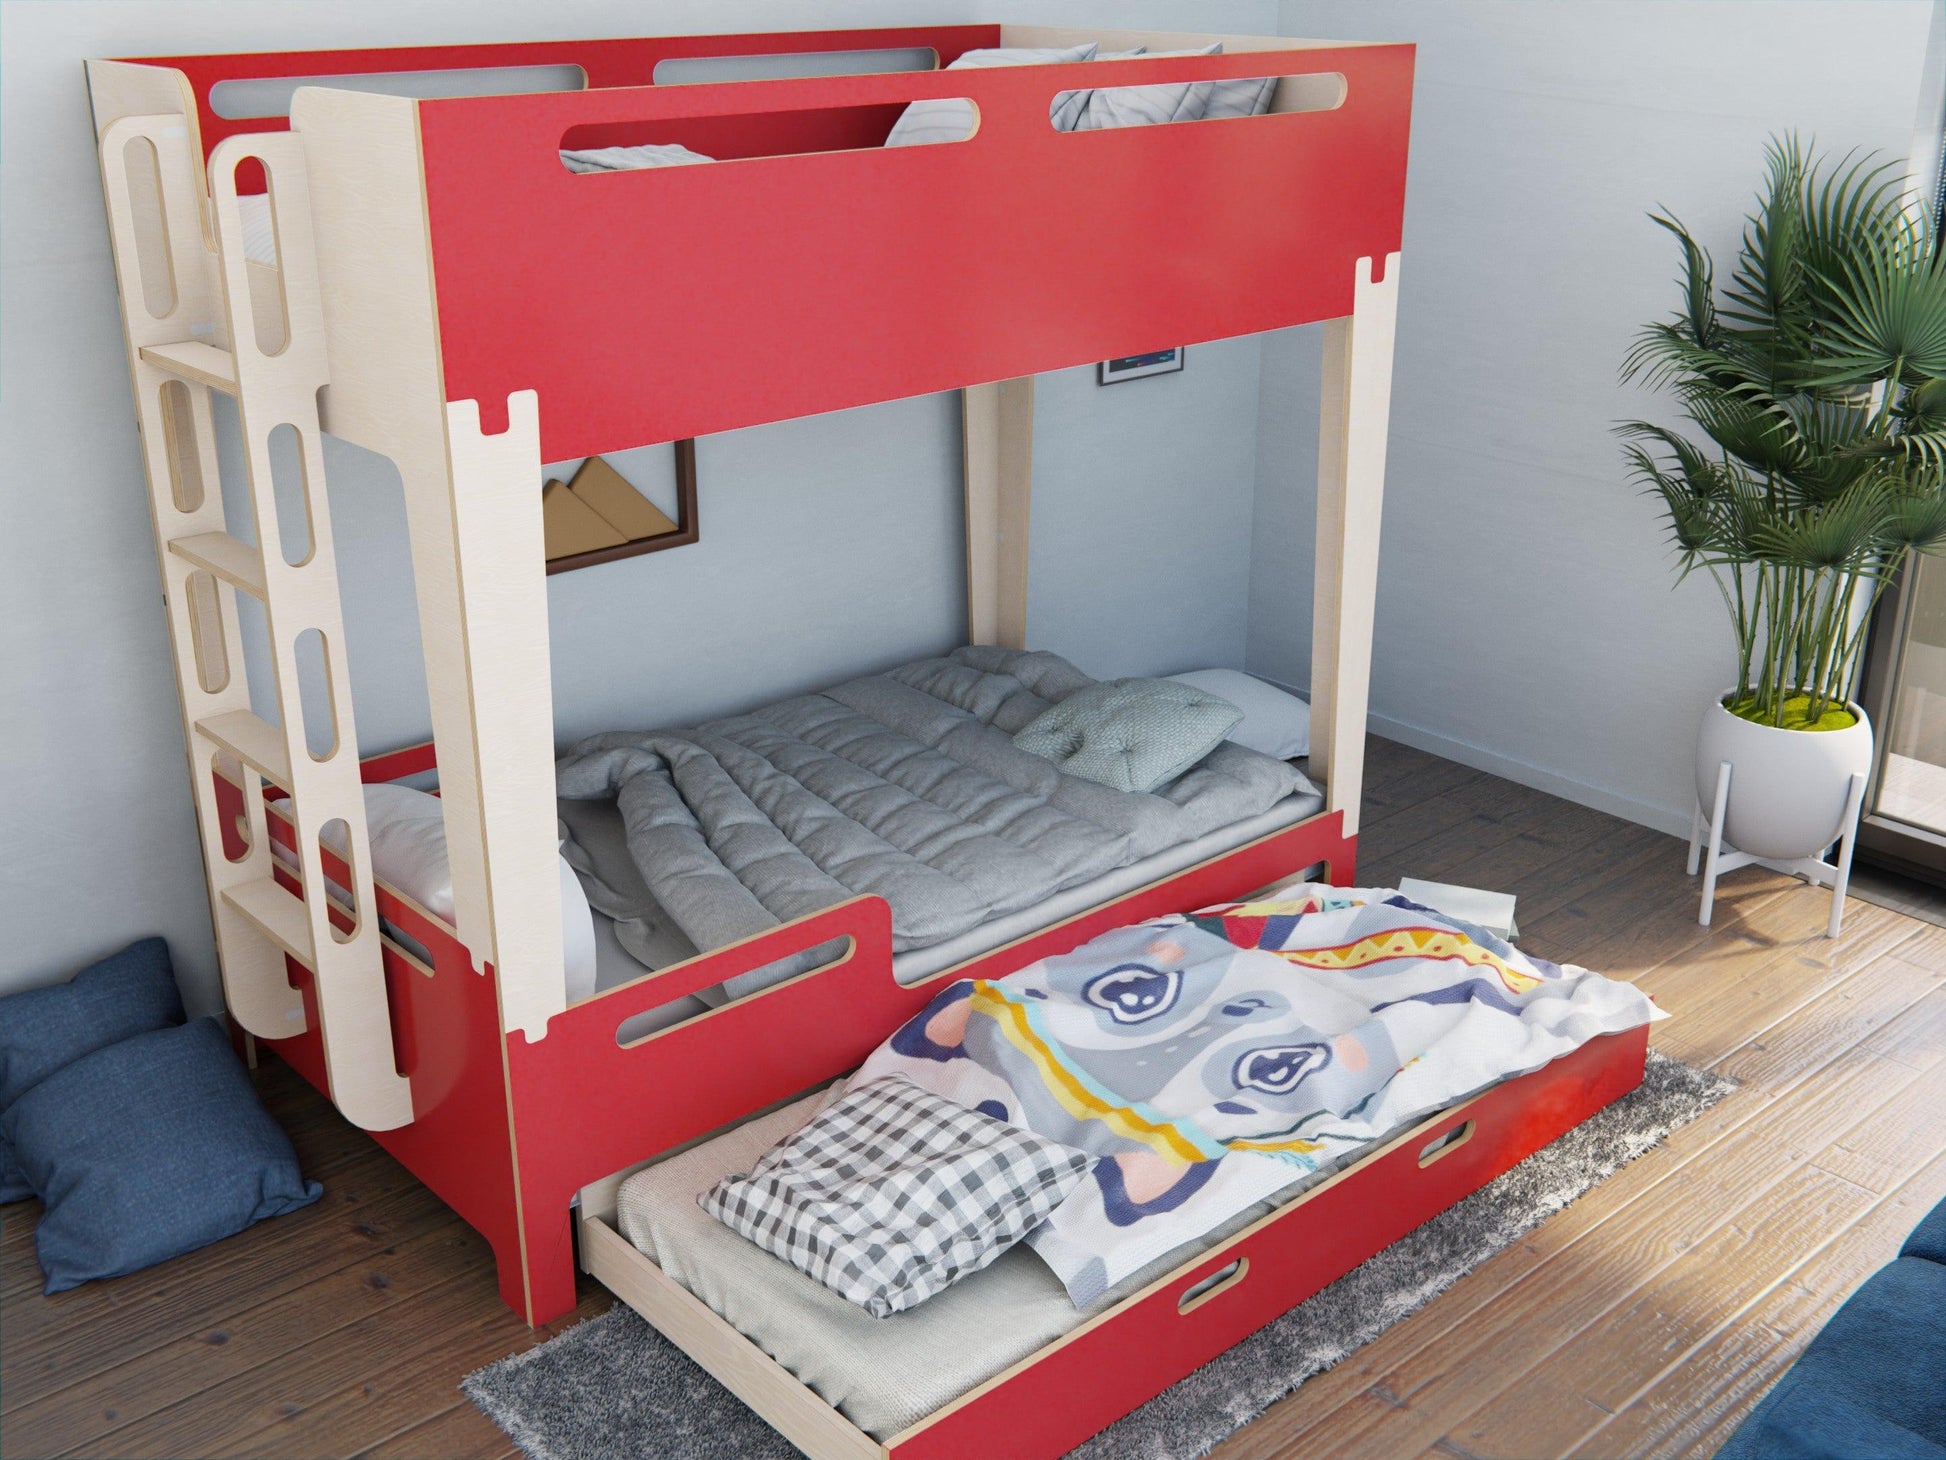 Space-saving red bunk bed with trundle bed.